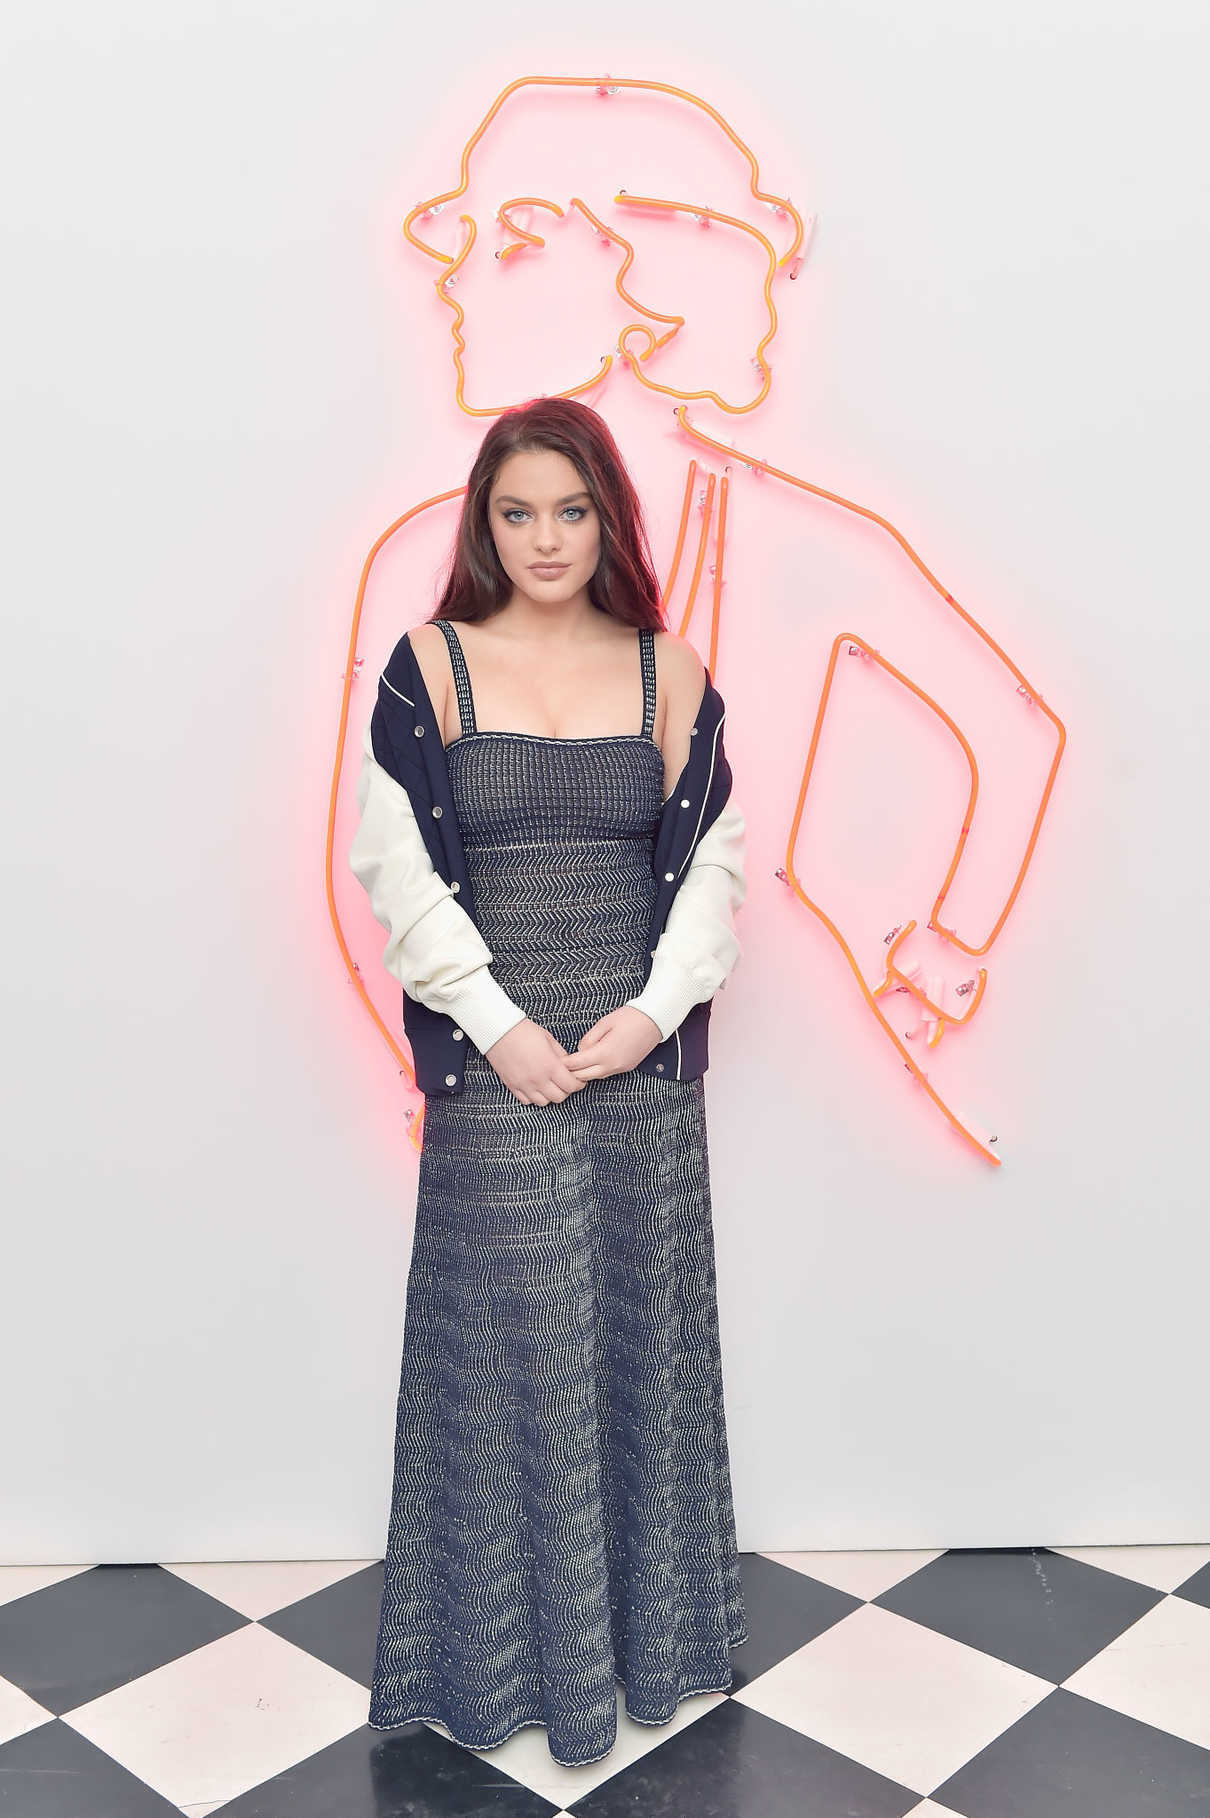 Odeya Rush Attends the Chanel Party to Celebrate the Chanel Beauty House in LA 02/28/2018-3